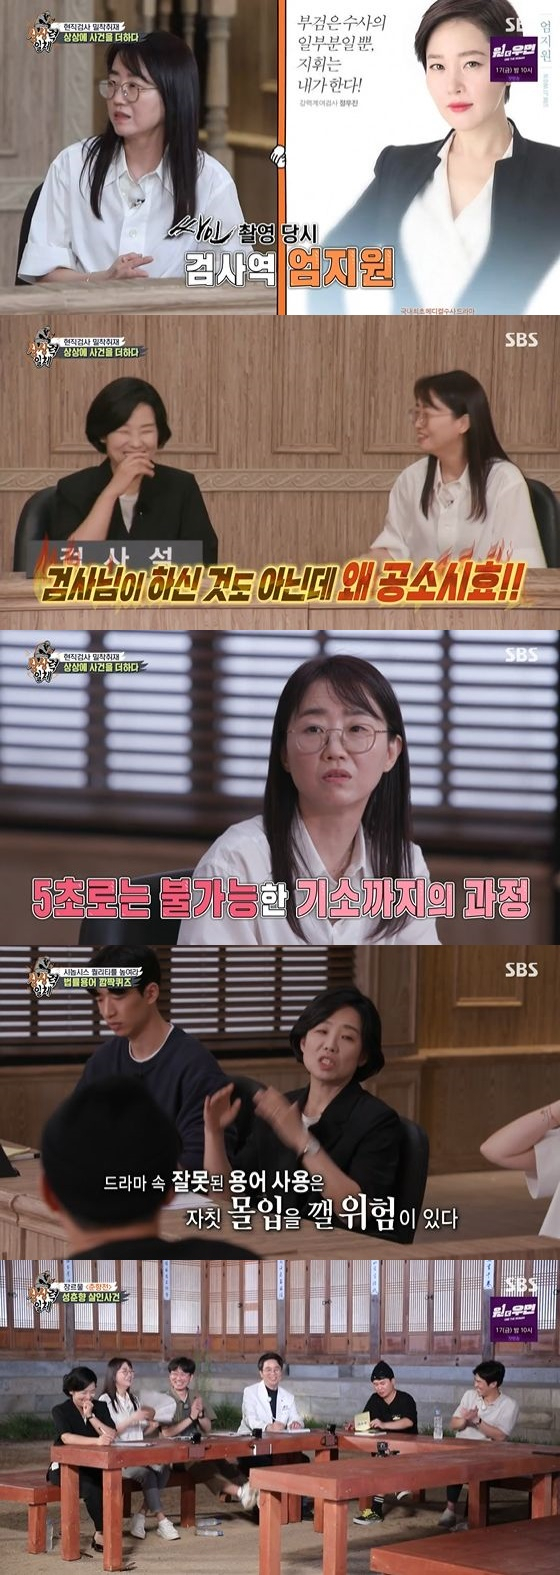 In SBS entertainment All The Butlers broadcasted on the afternoon of the 12th, the second story with Kim Eun-hee was drawn.Kim Eun-hee introduced the sea in-sun inspection, saying, There is an incumbent inspection that has helped me legally.Seo in-sun Inspection was a person who helped with various legal advice in Kim Eun-hees drama Signs and Signal.Kim said that he continued to call after the first Signs that he had a relationship with.So, Inspection explained, I was talking about what I had to do while drinking when I met.The scene mentioned by Seo Inspection was a scene where DNA was taken from glasses and interrogated.Kim said, If the statute of limitations is not long before the statute of limitations, the inspection will not be punished if the criminal is found.Of course, there are few in reality, but that was too unfair. Seo Inspection said, If you write a term wrong, you may personally break your immersion in the drama.Kim Eun-hee writes a lot of attention each term, he said, referring to Kim Eun-hees efforts to write high-quality works.On the other hand, the synopsis confrontation of the members who made Kim Eun-hees notebook as a product was drawn.Team Hungbujeon (Jeon Seok-ho, Yang Se-hyung) and team Chunhyangjeon (Lee Seung-gi, Kim Dong-Hyun, Yoo Soo-bin) were divided and announced the scenario.Kim Eun-hee writer and director Jang Hang-joon, and Ha Hong-il and Seo in-sun inspection chose the Heungbujeon team, which gave a high score to the novelty of the scenario after a long period of discussion.Kim Eun-hee explained, We did not know that this result would come out.